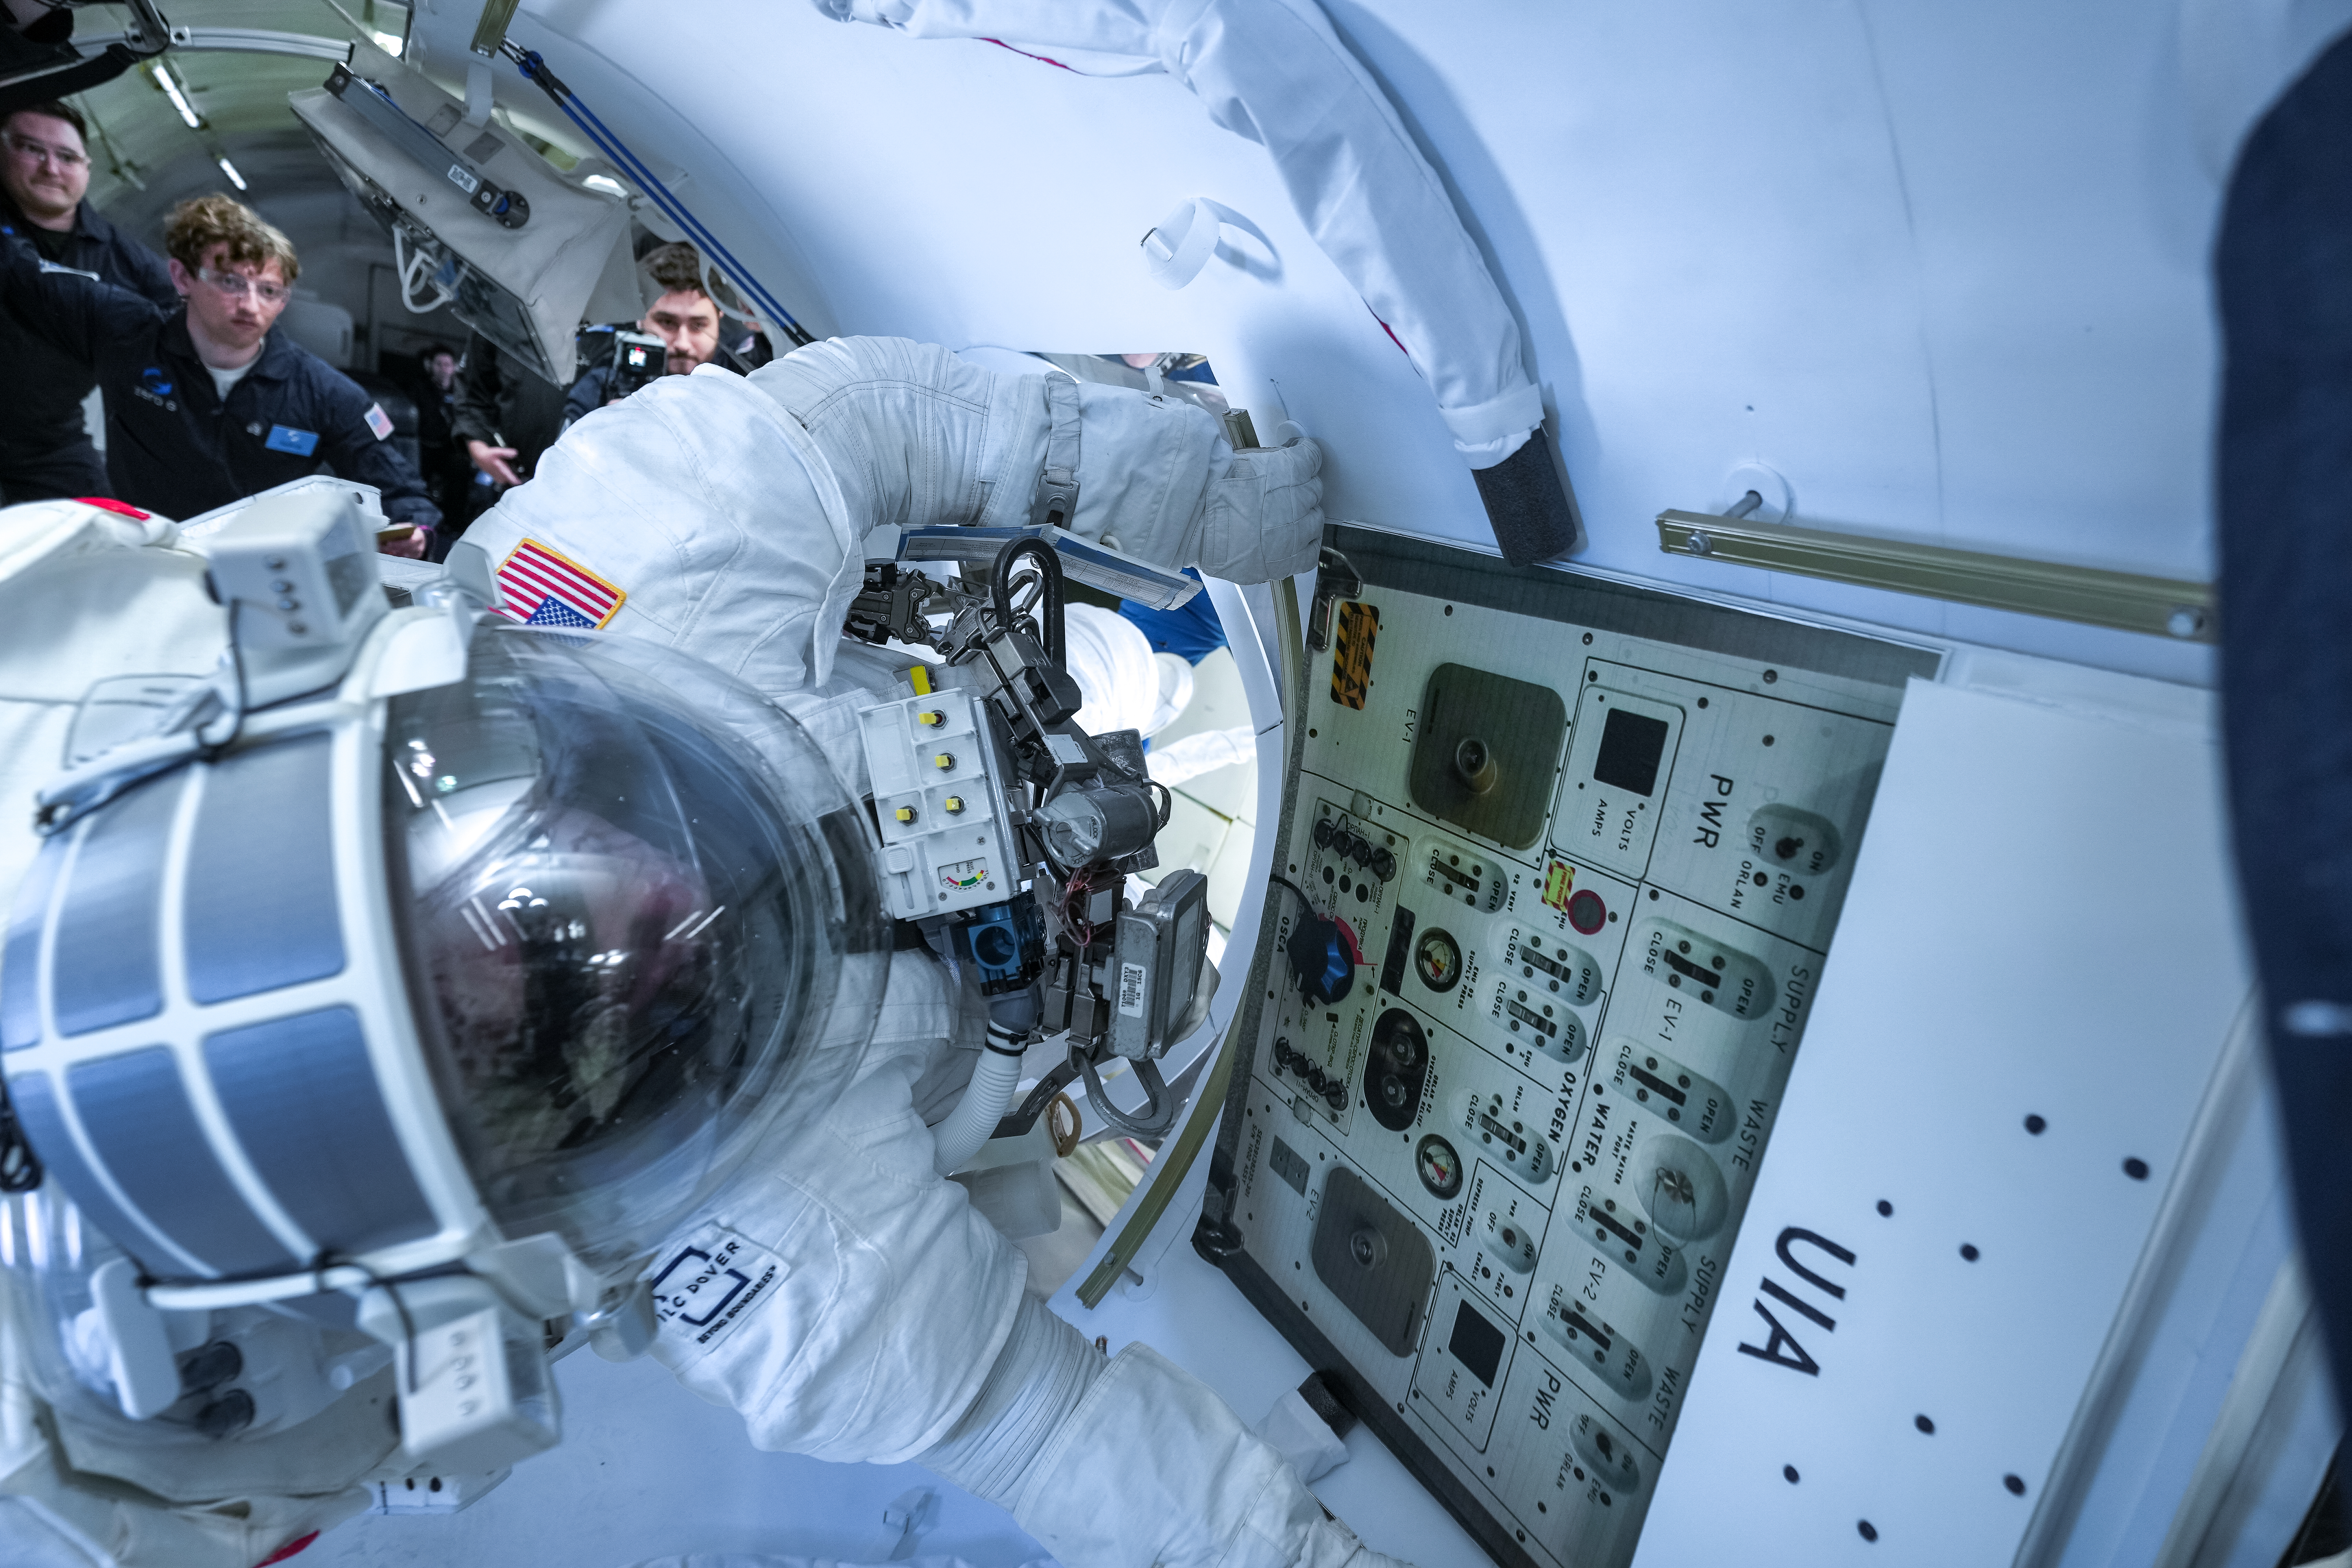 Collins Aerospace’s chief test astronaut John “Danny” Olivas demonstrates a series of tasks during testing of Collins’ next-generation spacesuit while aboard a zero-gravity aircraft.